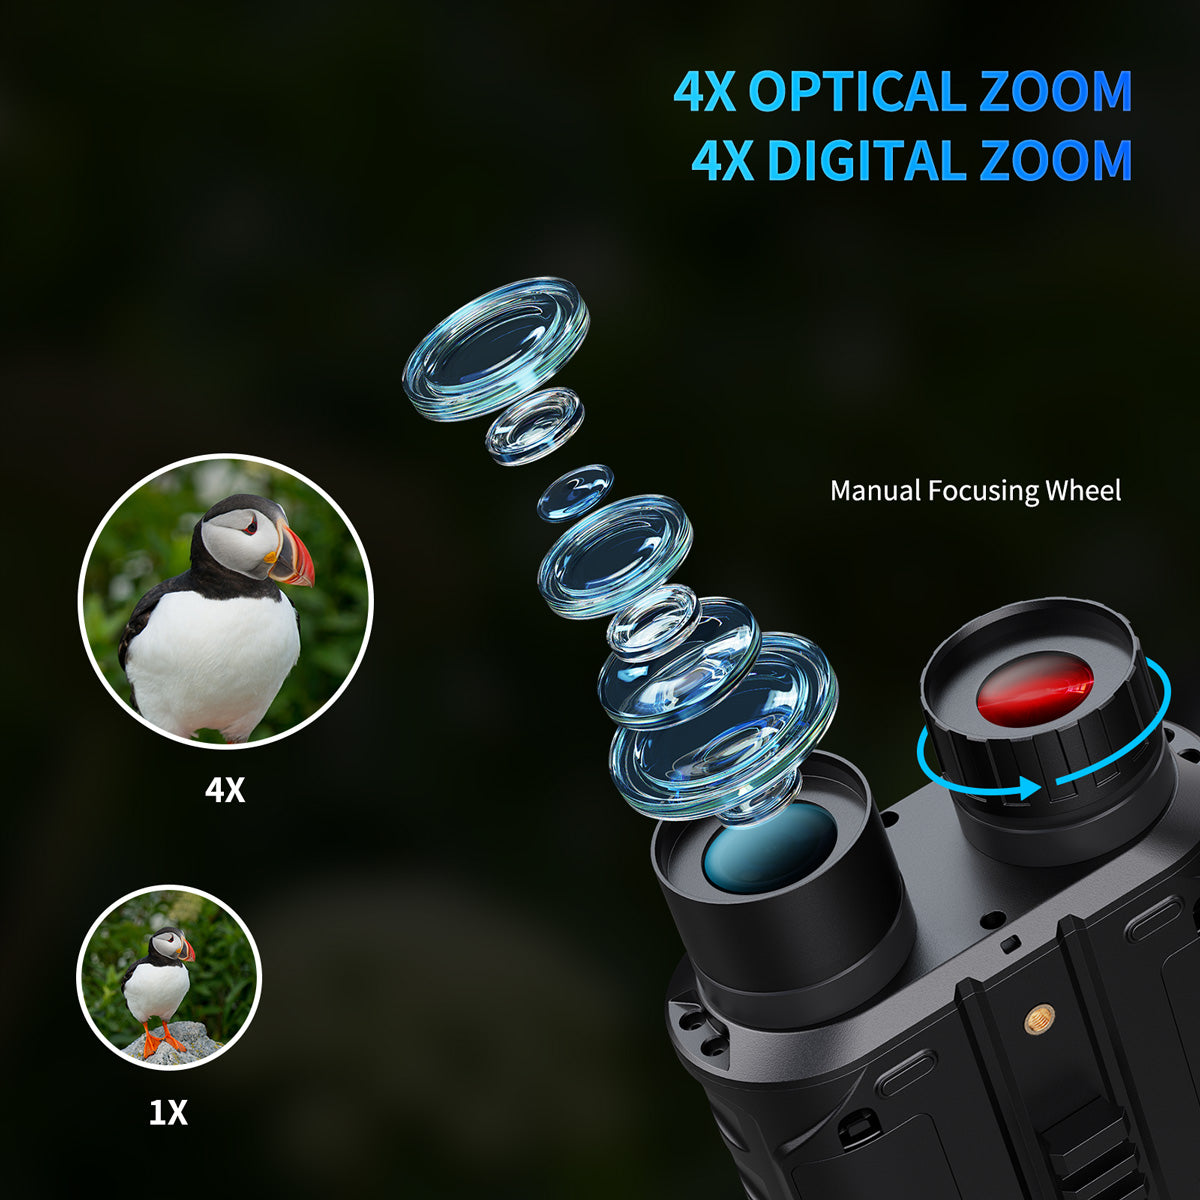 Campark NV100 4X Optical Zoom Wildlife Infrared Night Vision Binoculars （Only Available in Europe）